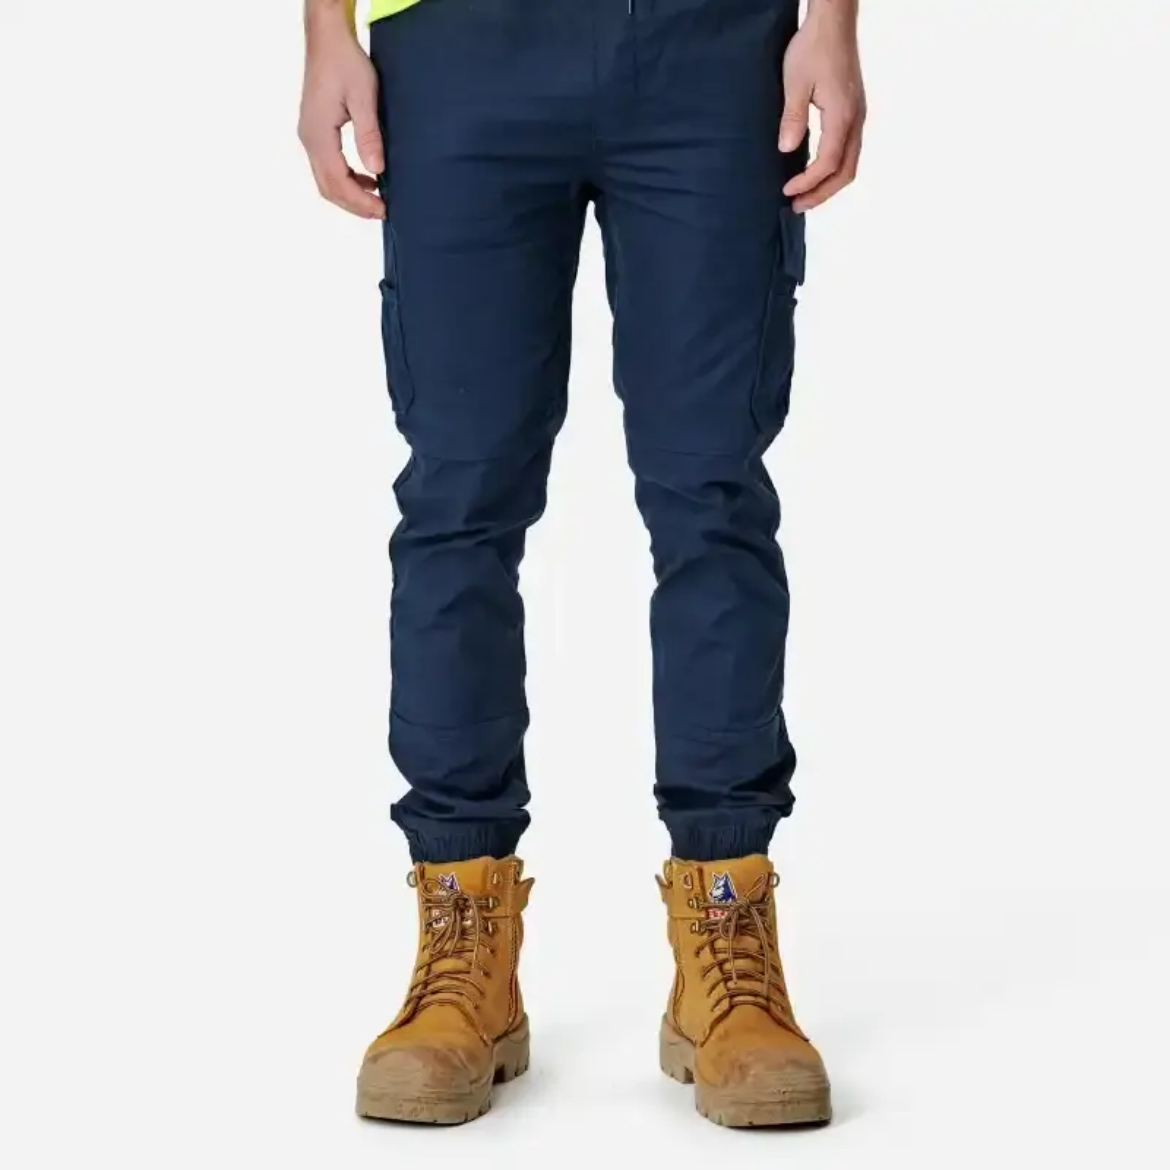 Picture of Elwood Workwear, Mens Cuffed Pant